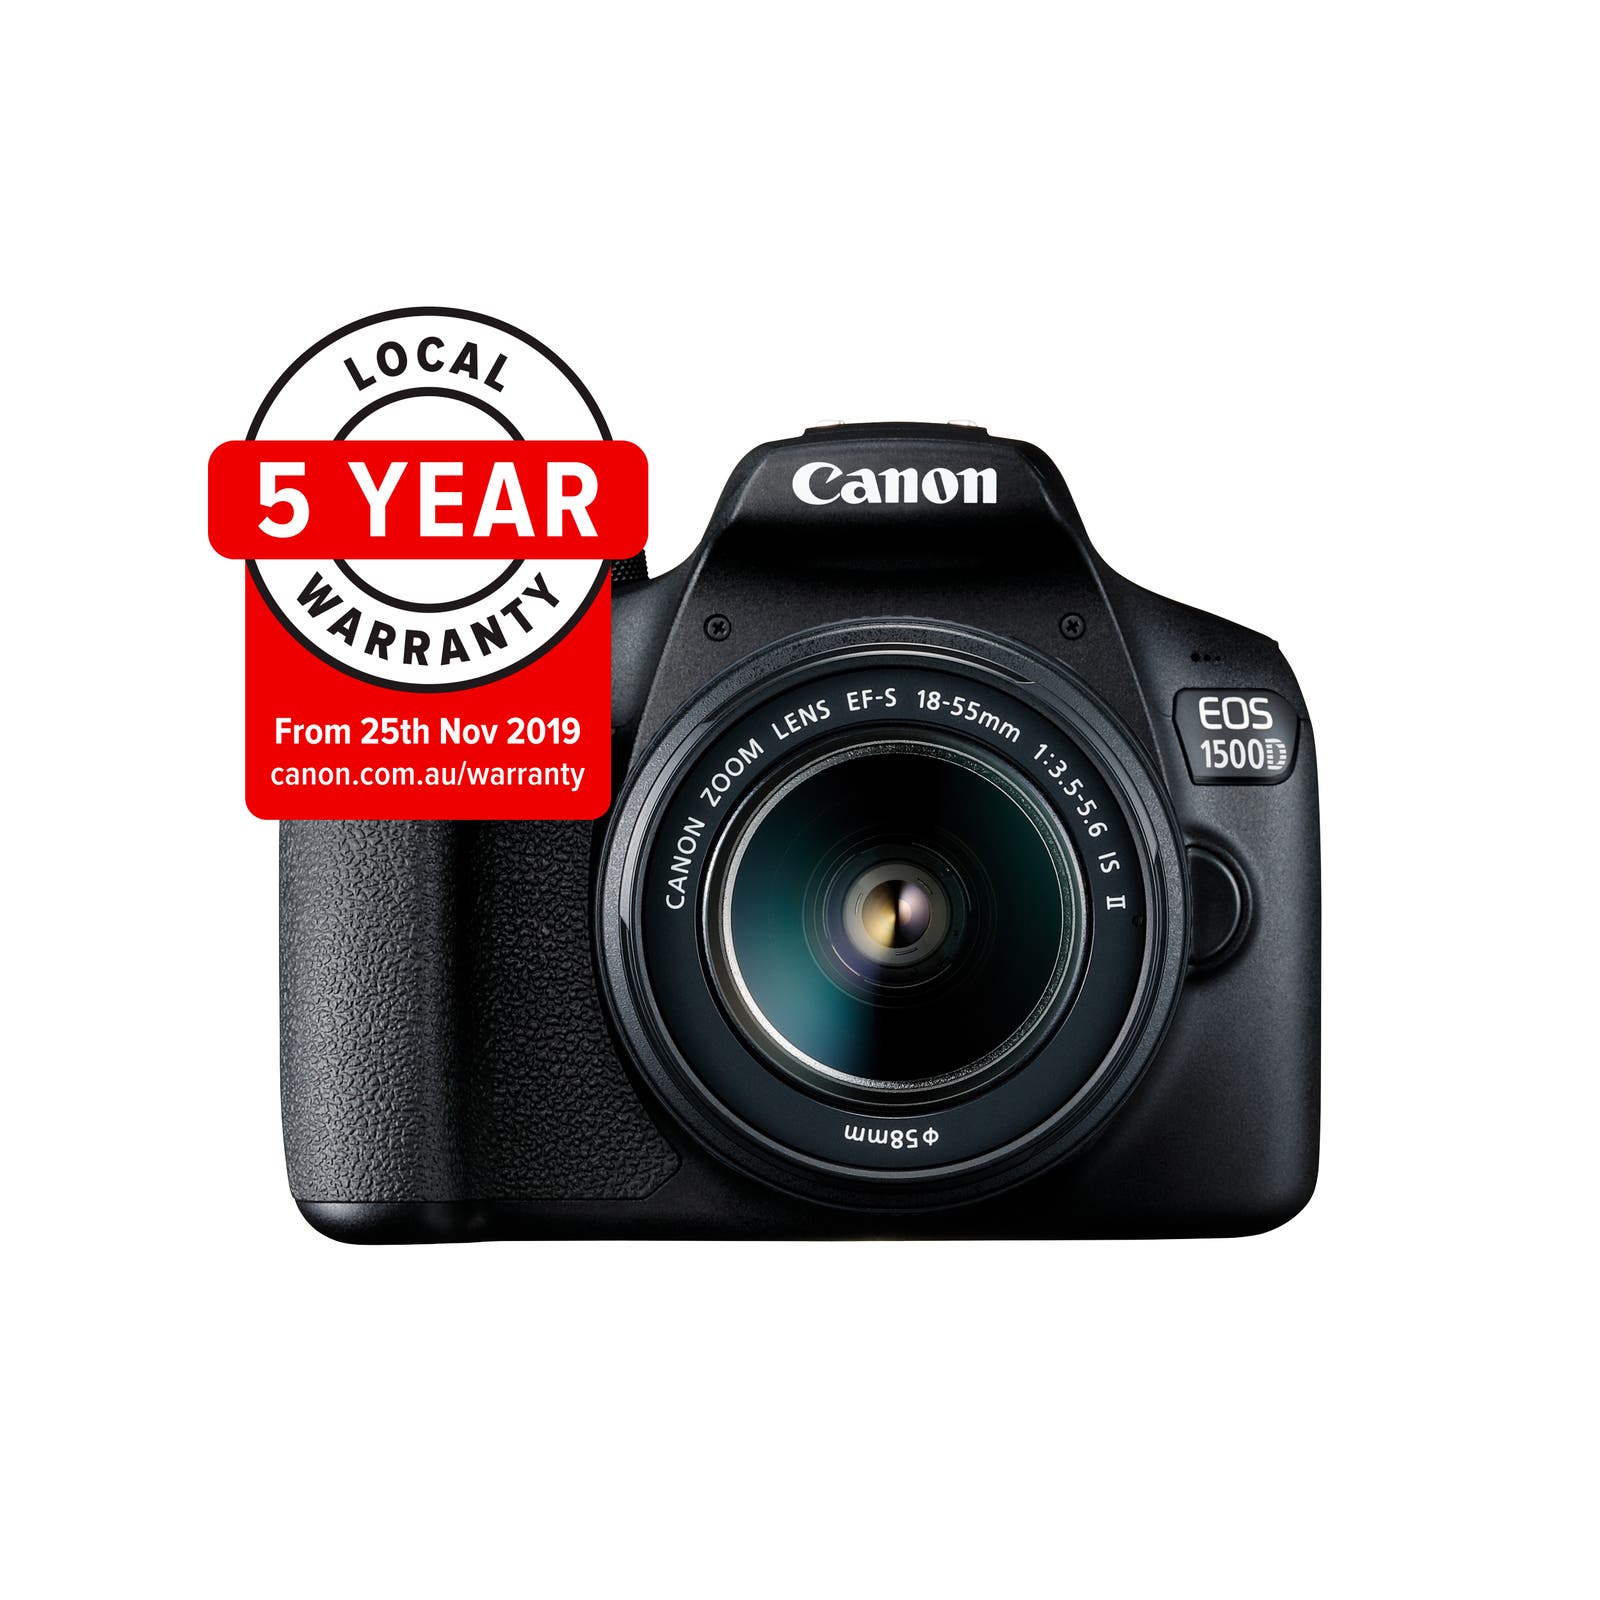 Canon EOS 1500D DSLR Camera with EF-S 18-55mm III Lens Kit